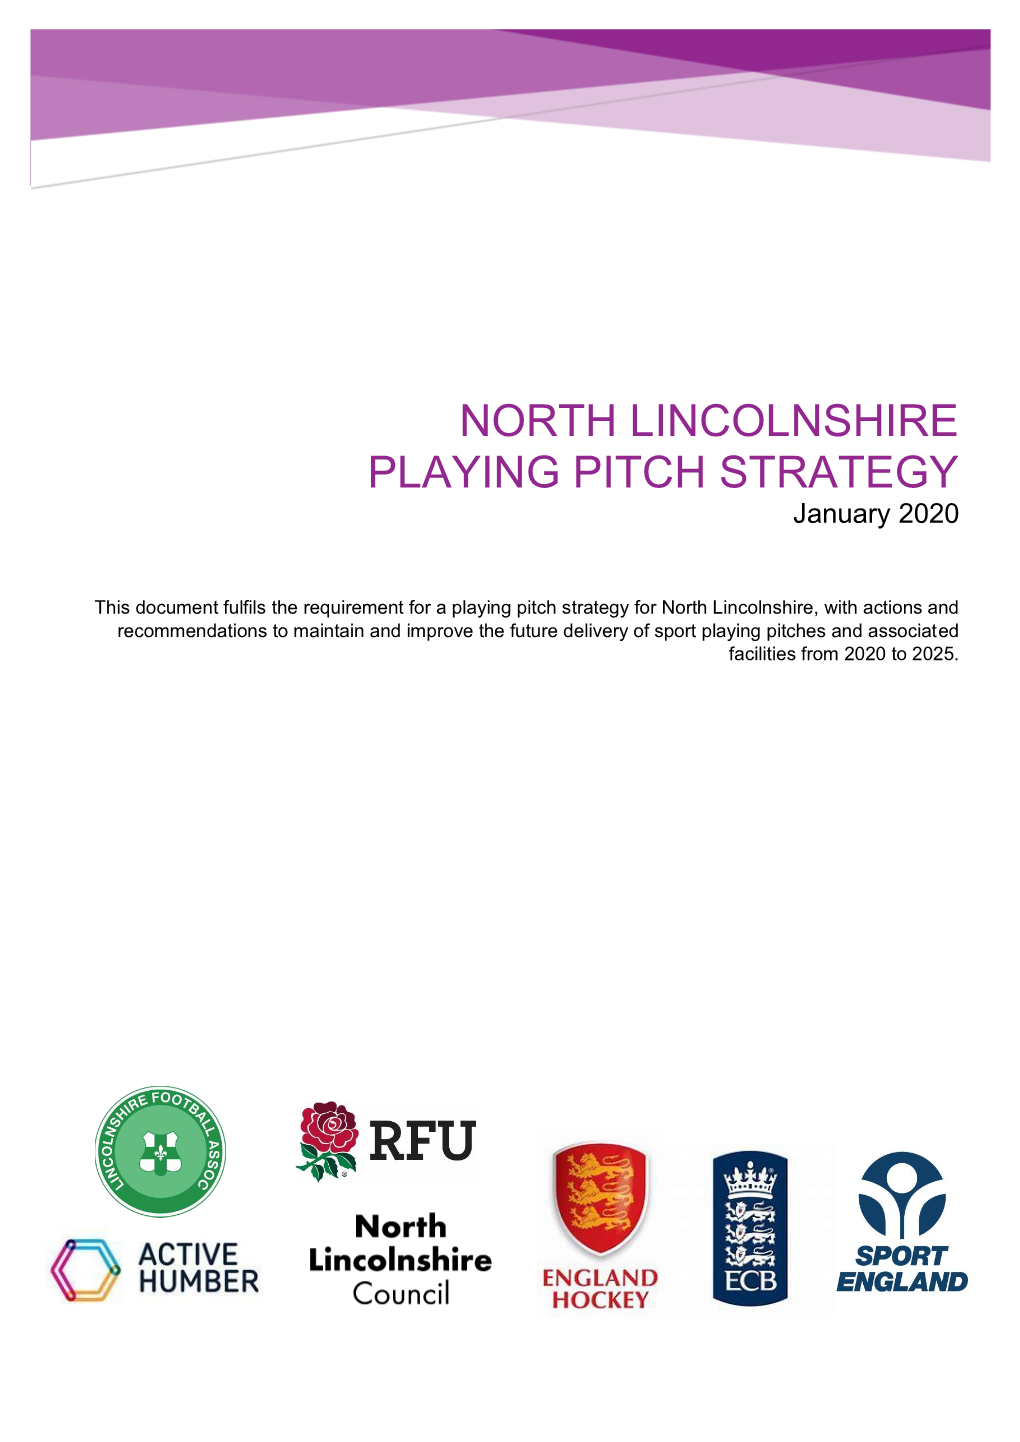 North Lincolnshire Playing Pitch Strategy 2020-2025